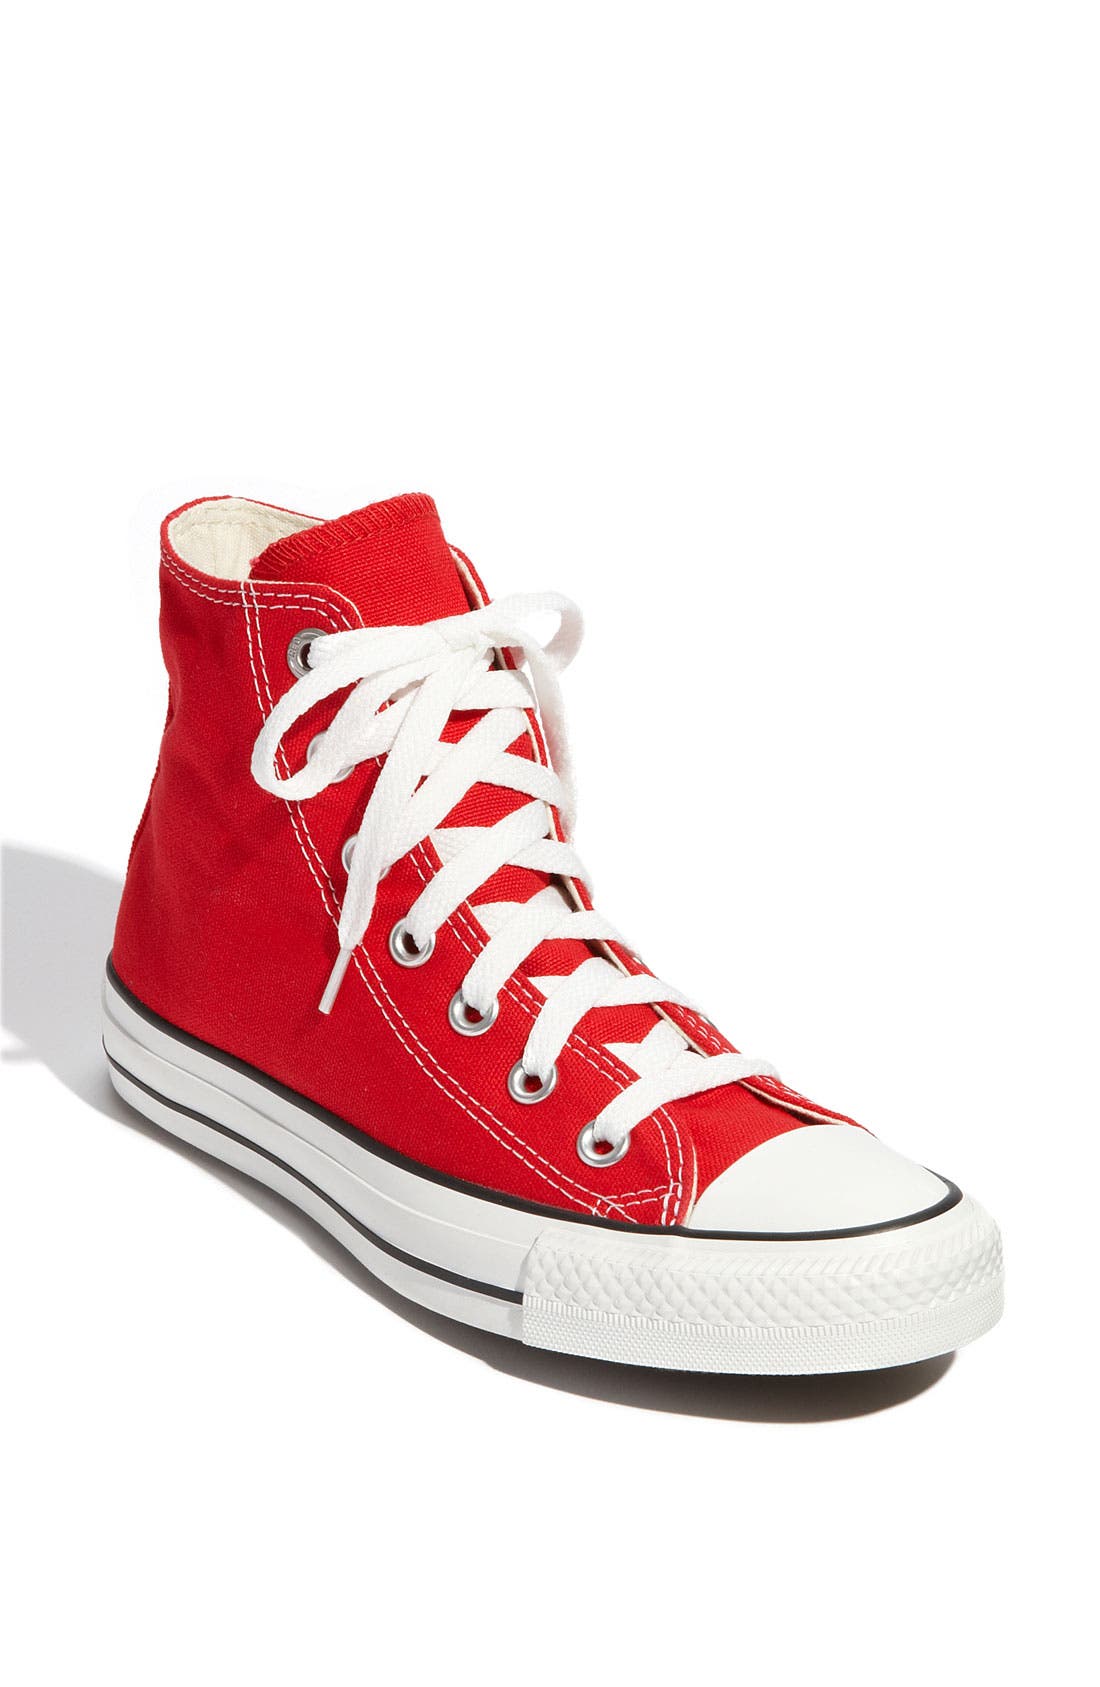 UPC 022859552325 product image for Women's Converse Chuck Taylor High Top Sneaker, Size 13 M - Red | upcitemdb.com